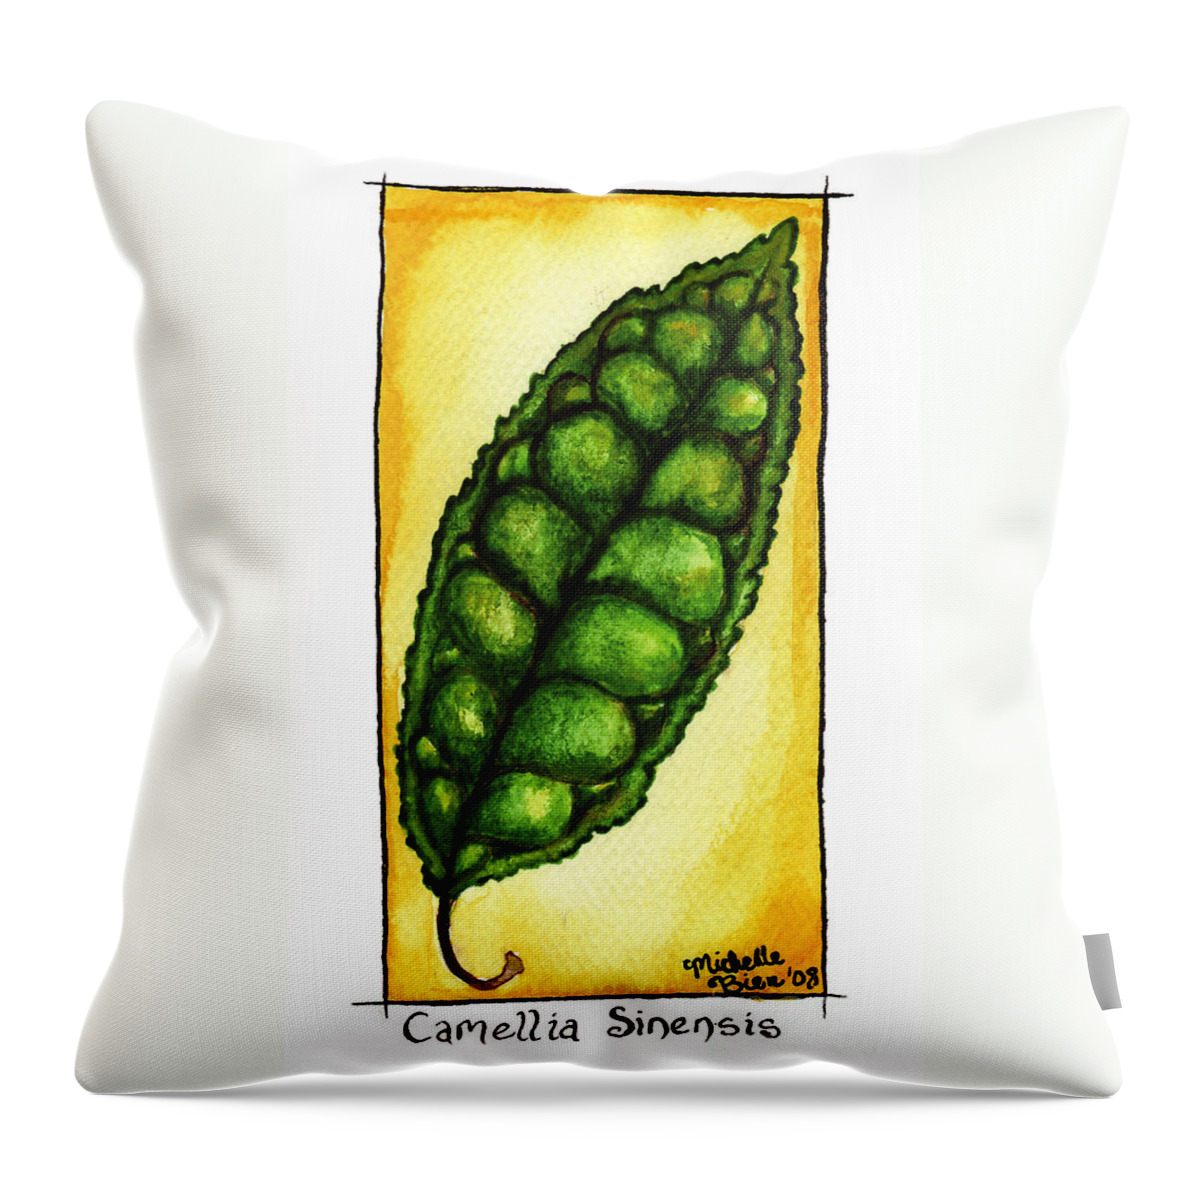 Camellia Sinensis Throw Pillow featuring the painting Camellia Sinensis Leaf by Michelle Bien